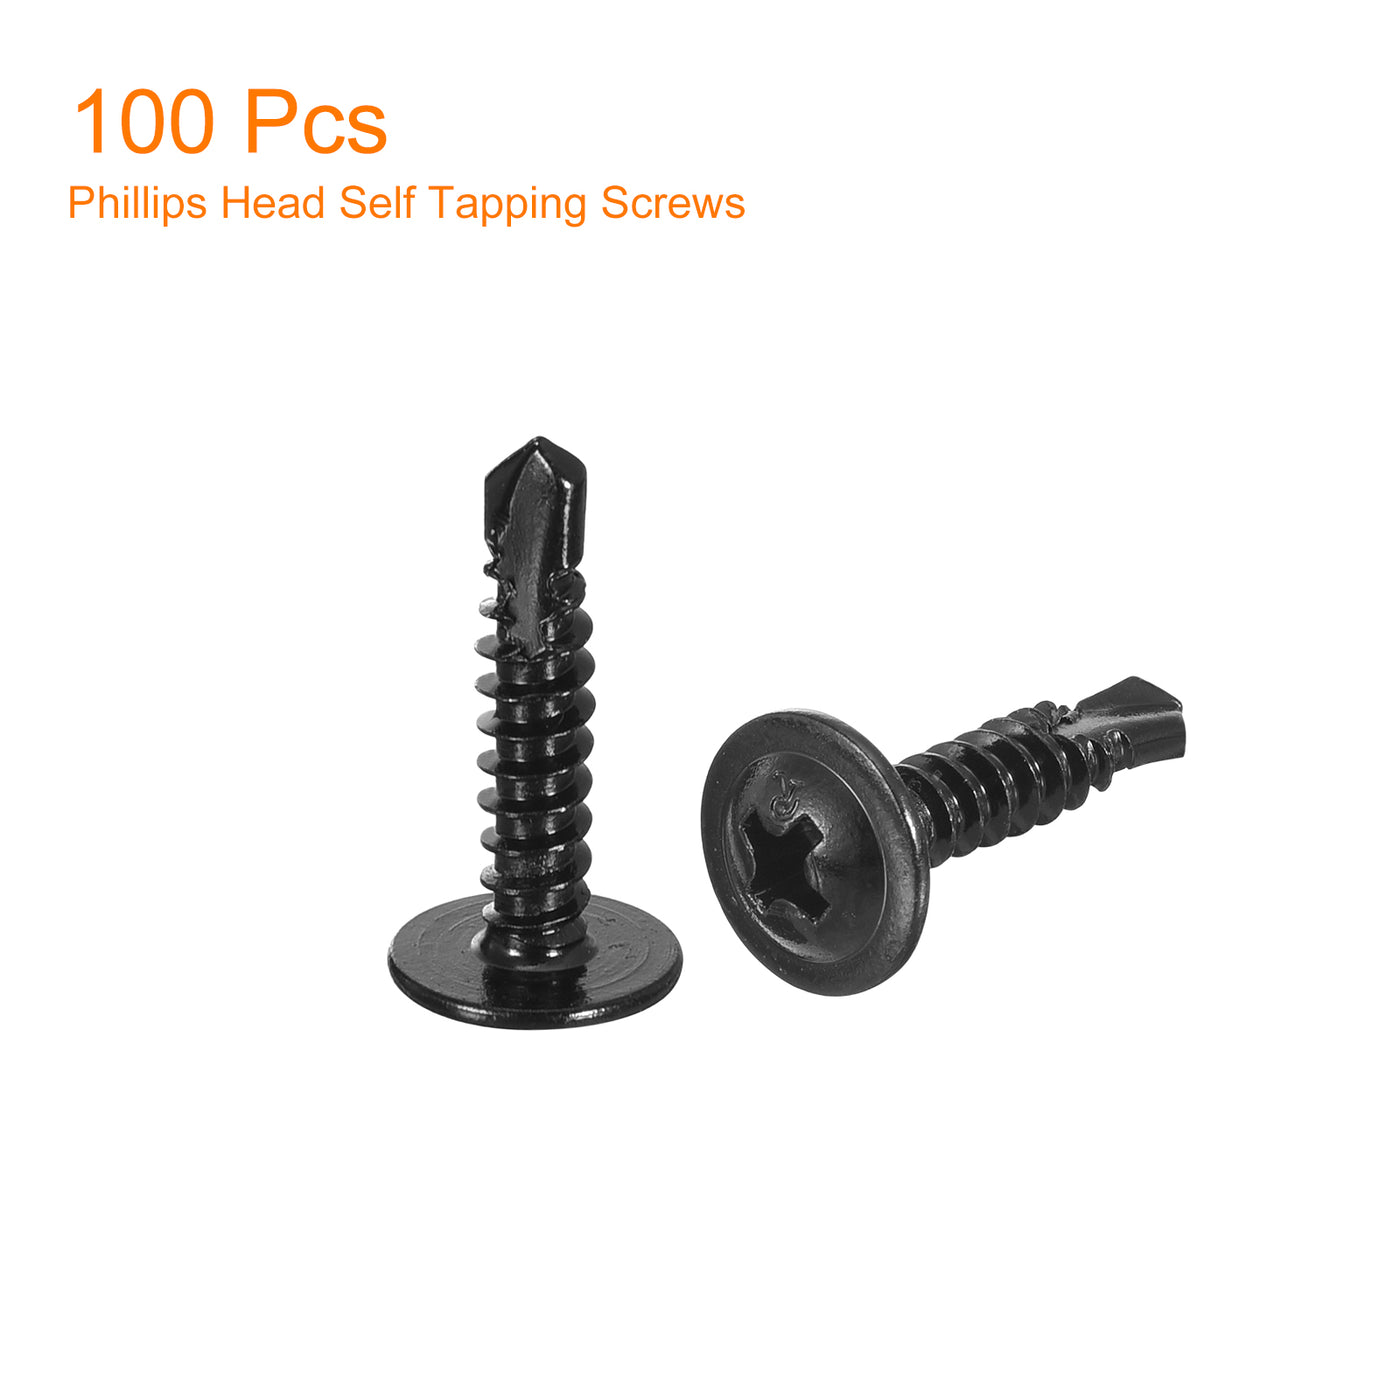 uxcell Uxcell Phillips Head Self Tapping Screws, 100pcs #8x3/4" Sheet Metal Screw